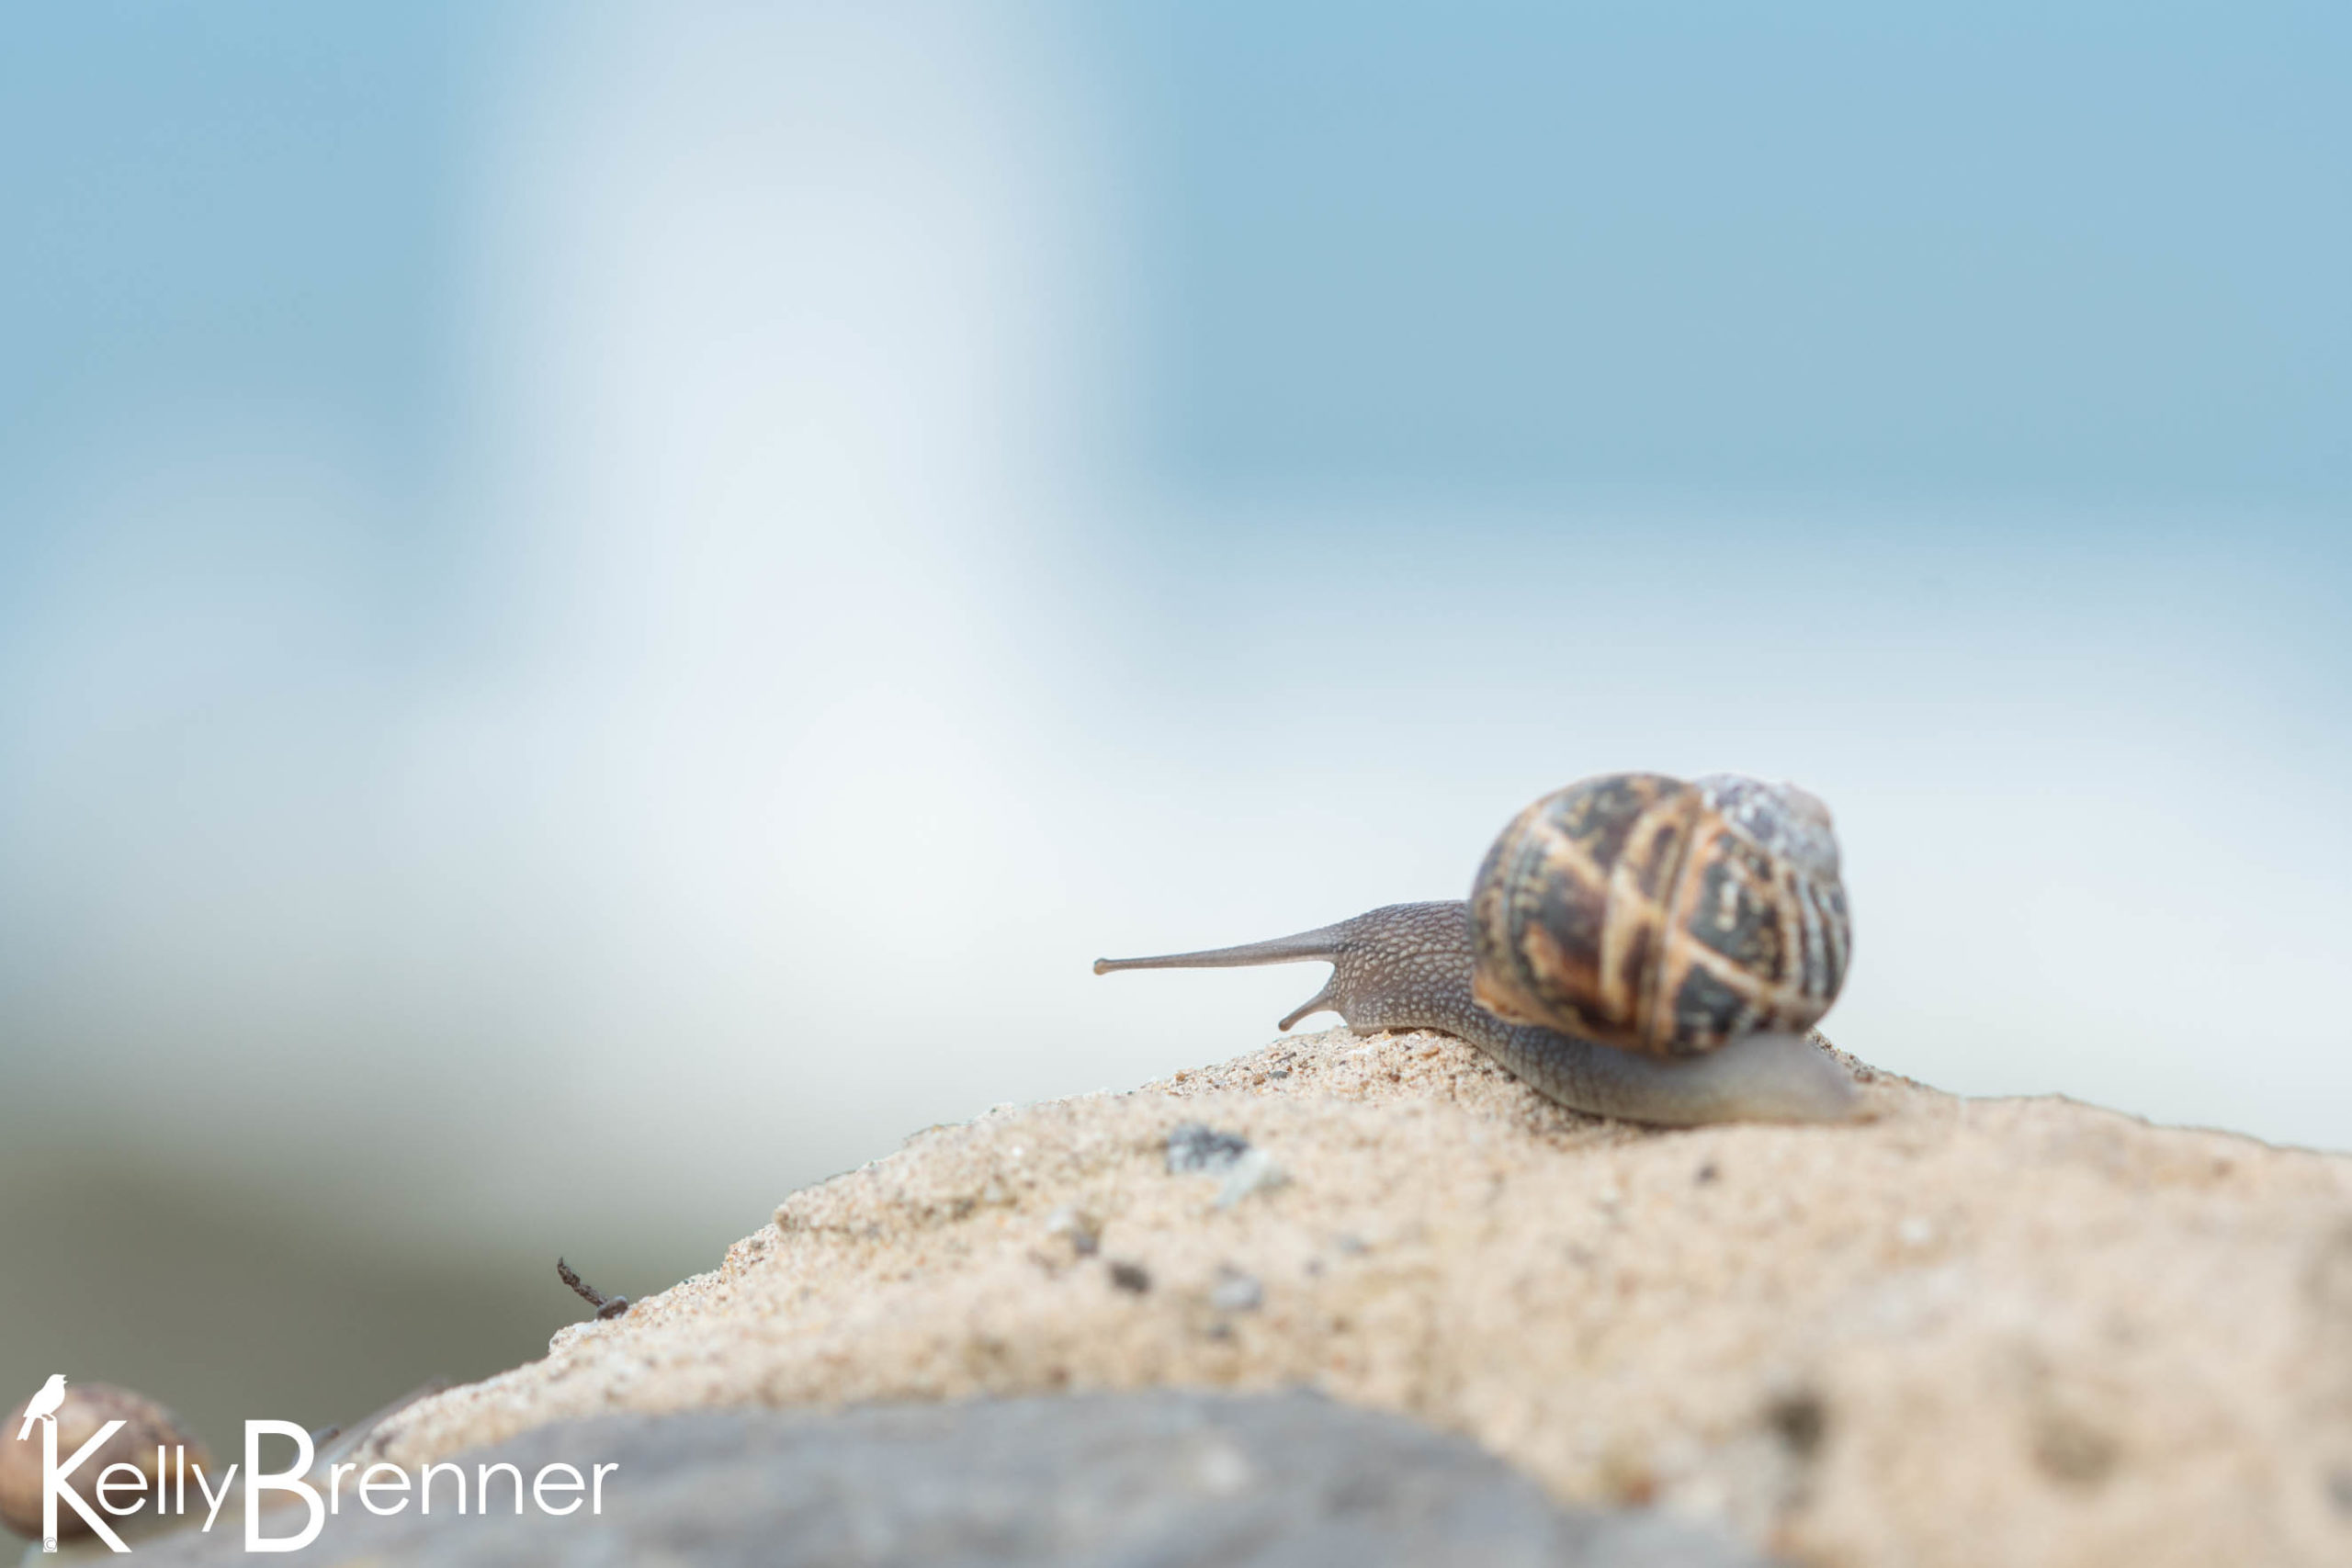 Poem of the Week: The Snail